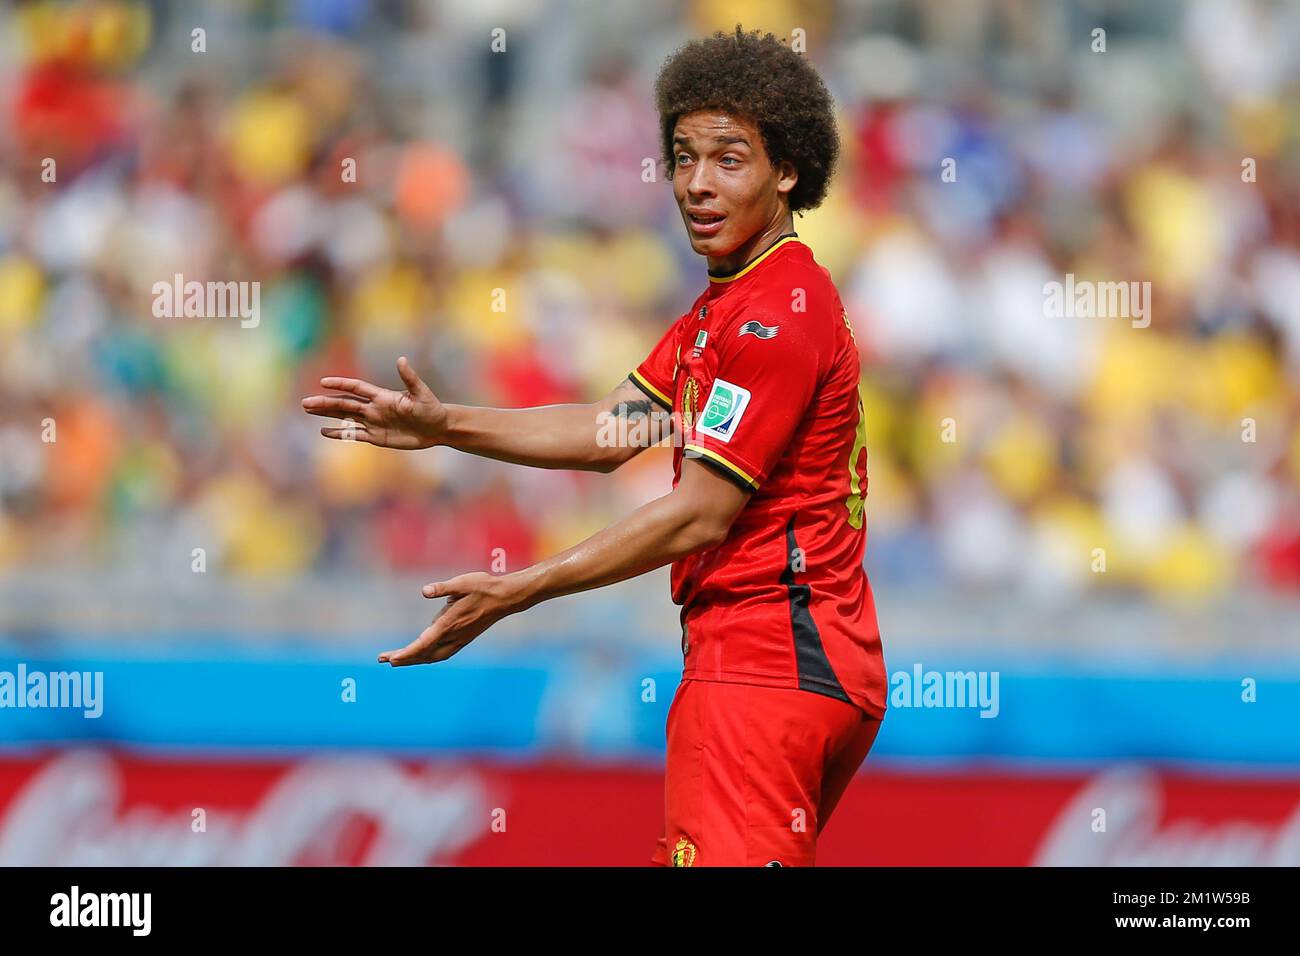 Belgium's Axel Witsel reacts during a soccer game between Belgian national team The Red Devils and Algeria in Belo Horizonte, Brazil, the first game in Group H of the first round of the 2014 FIFA World Cup, Tuesday 17 June 2014. Stock Photo